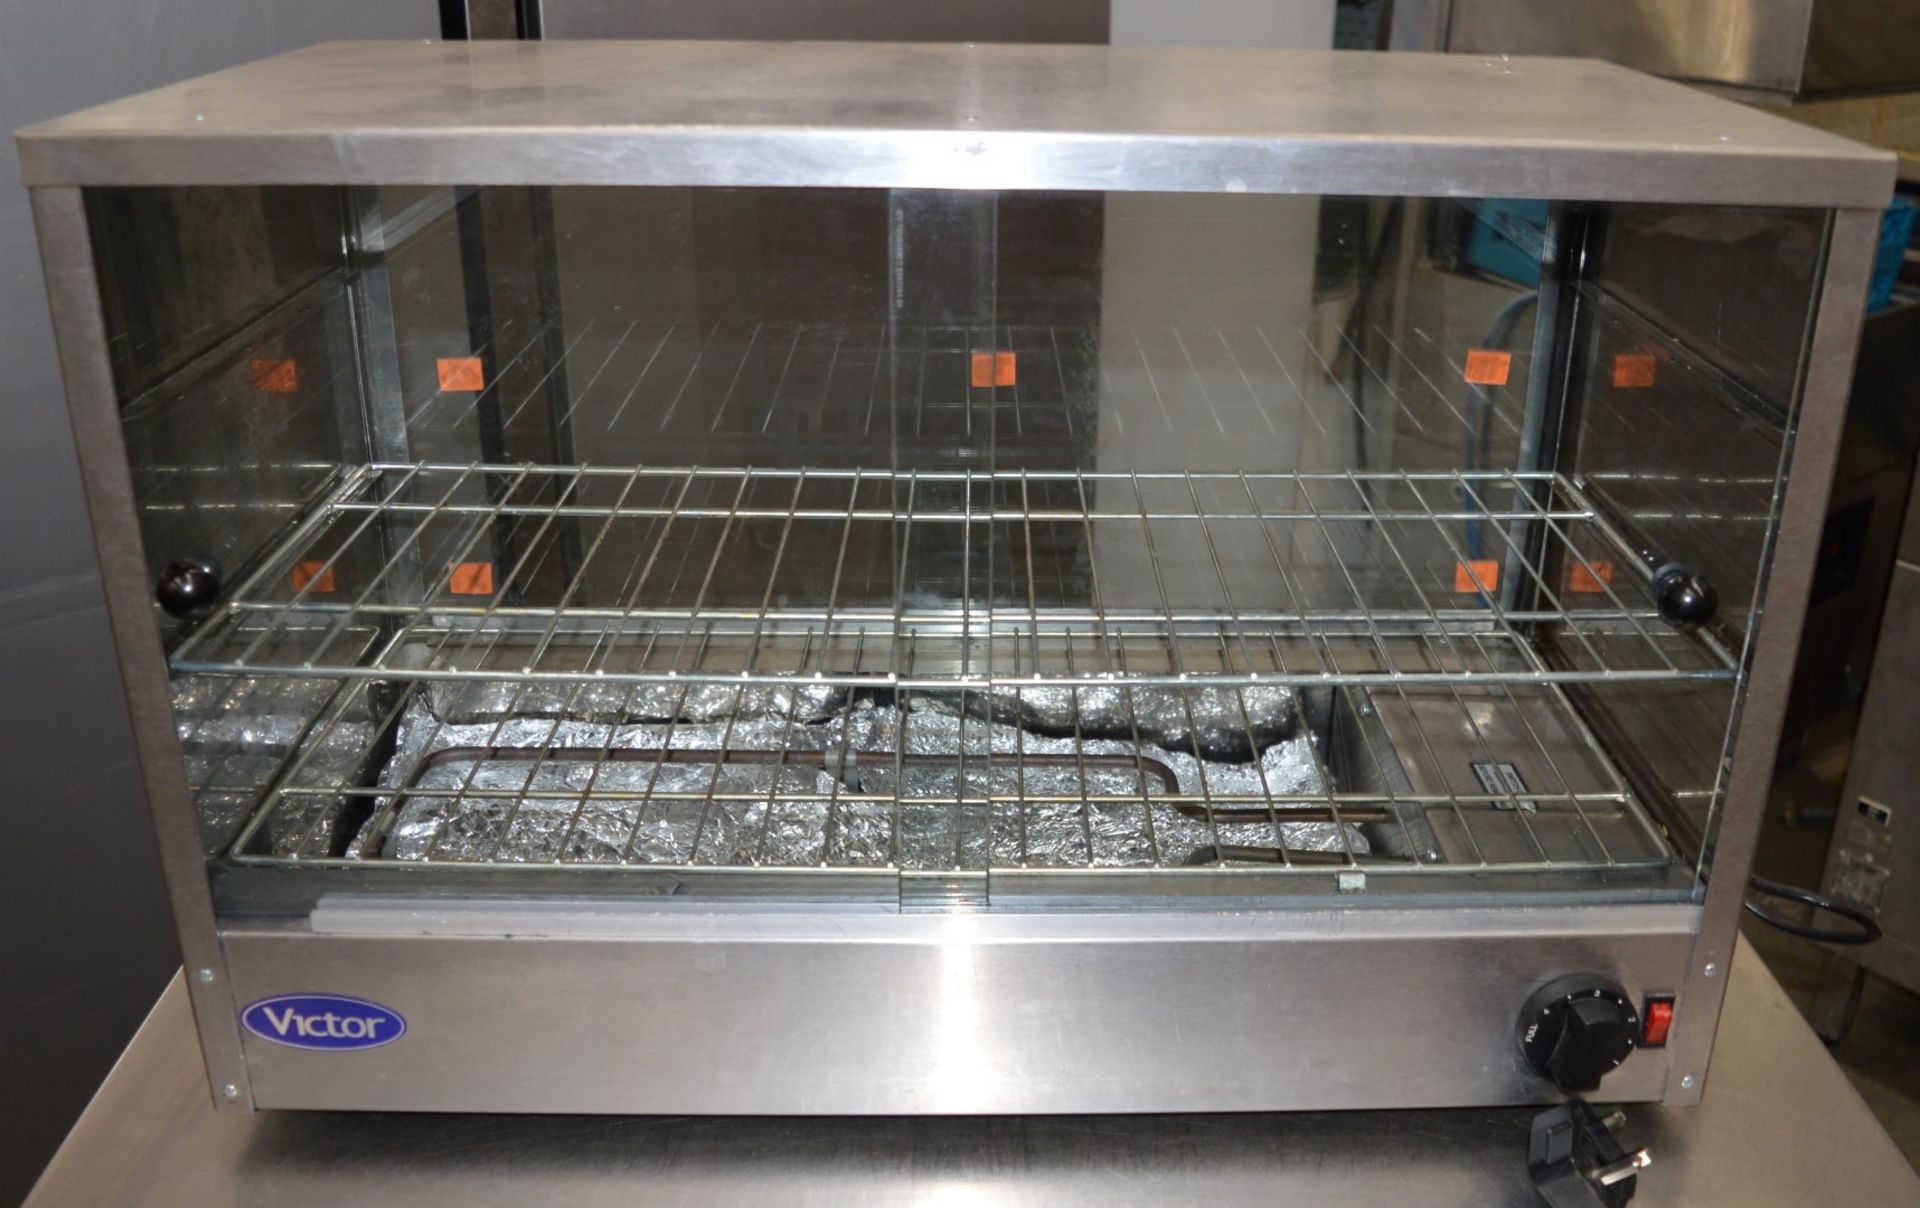 1 x Victor Counter Top Pie Heater - Stainless Steel With Internal Wire Shelves - Ideal For Cafes - Image 3 of 5